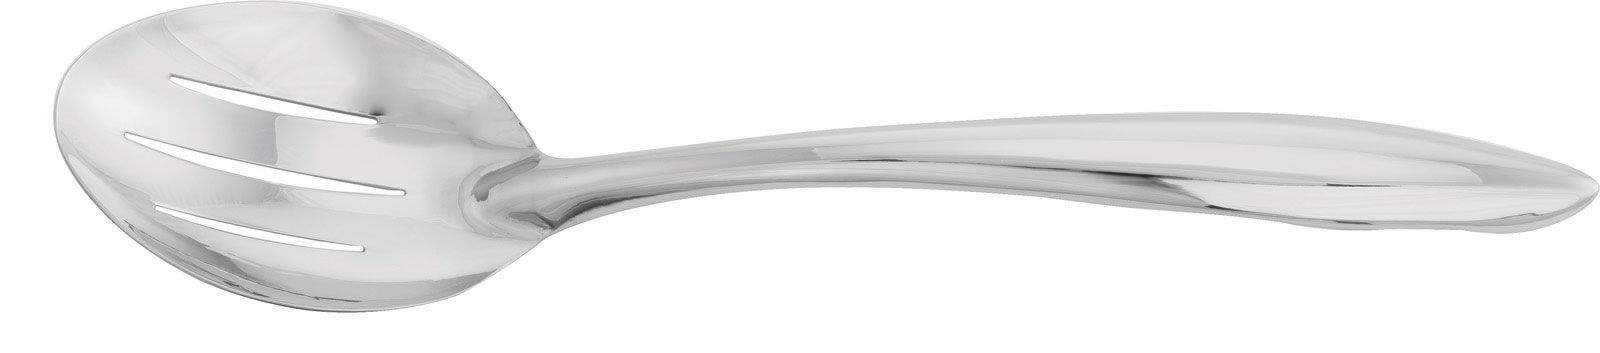 Walco Stainless ID126 Serving Spoon, Slotted